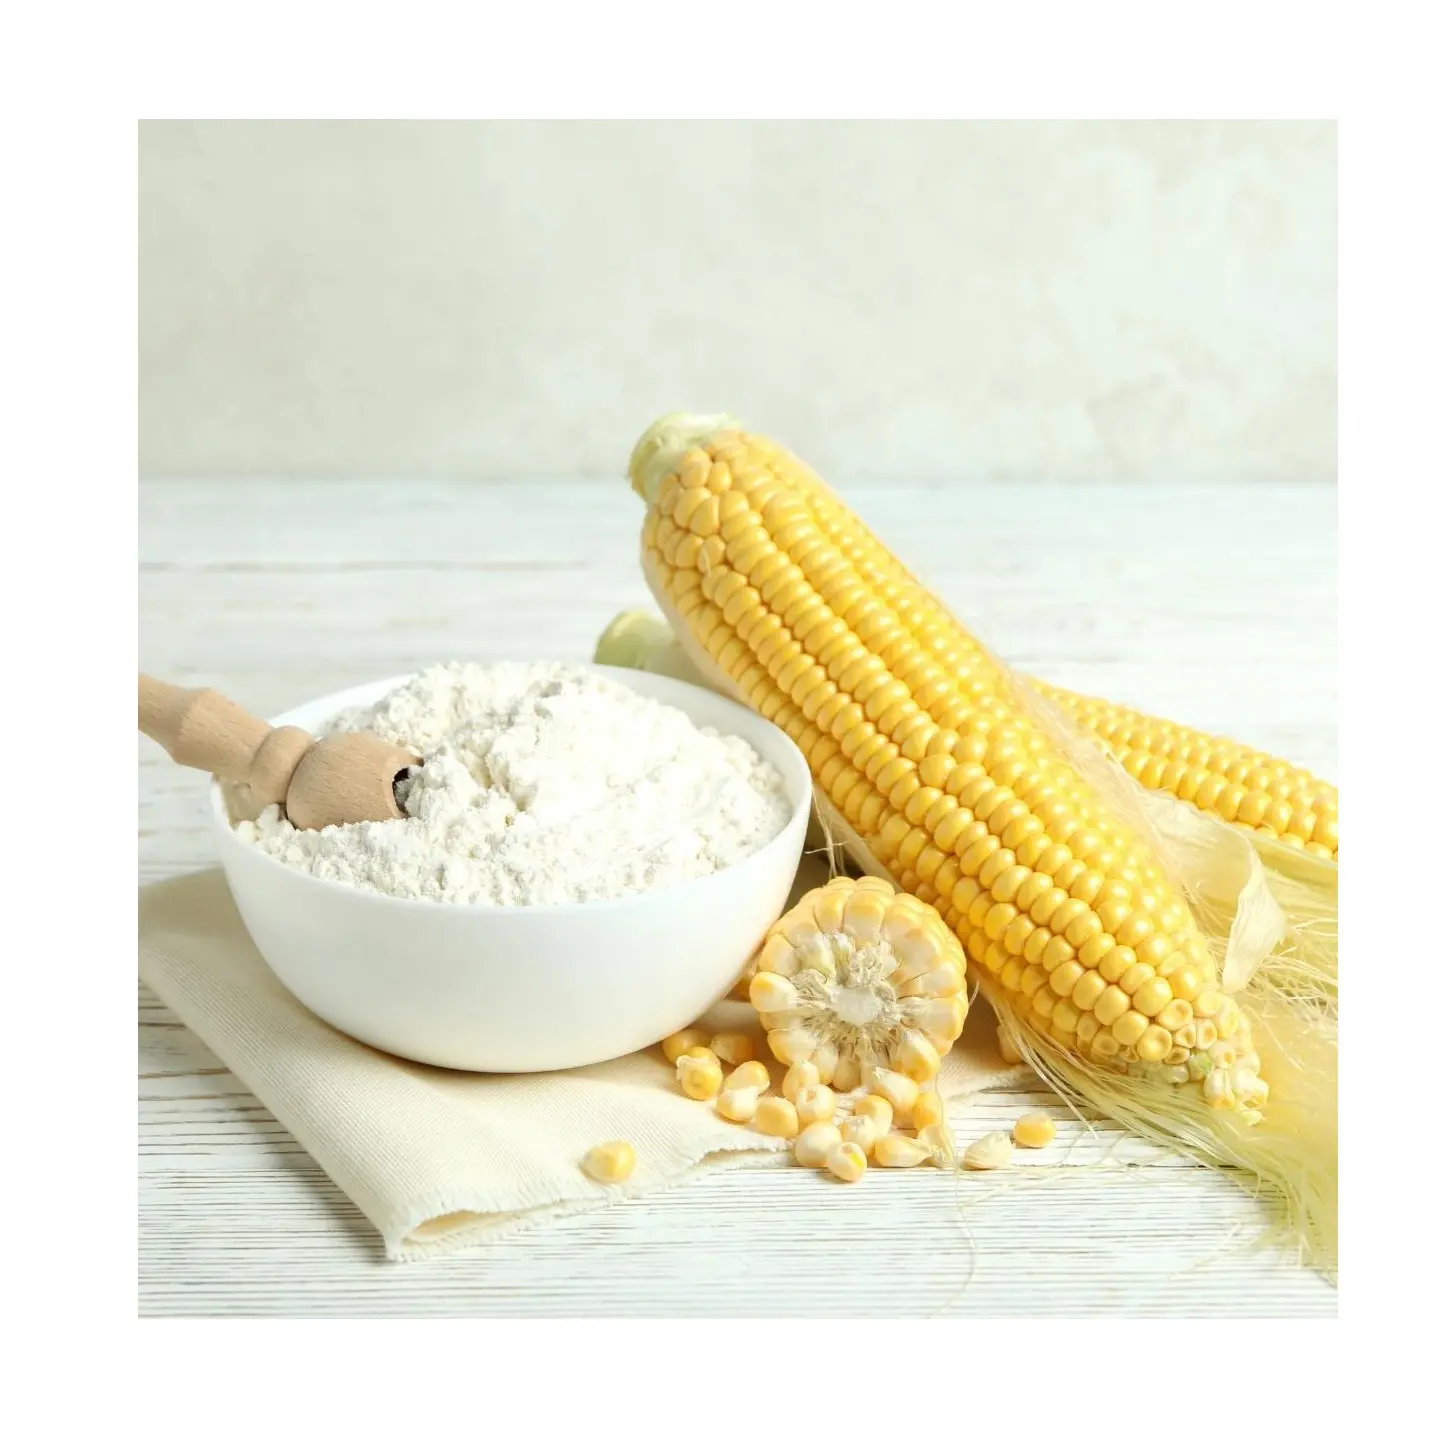 Best Selling Product Premium Quality World best quality Corn Flour At Reasonable Price